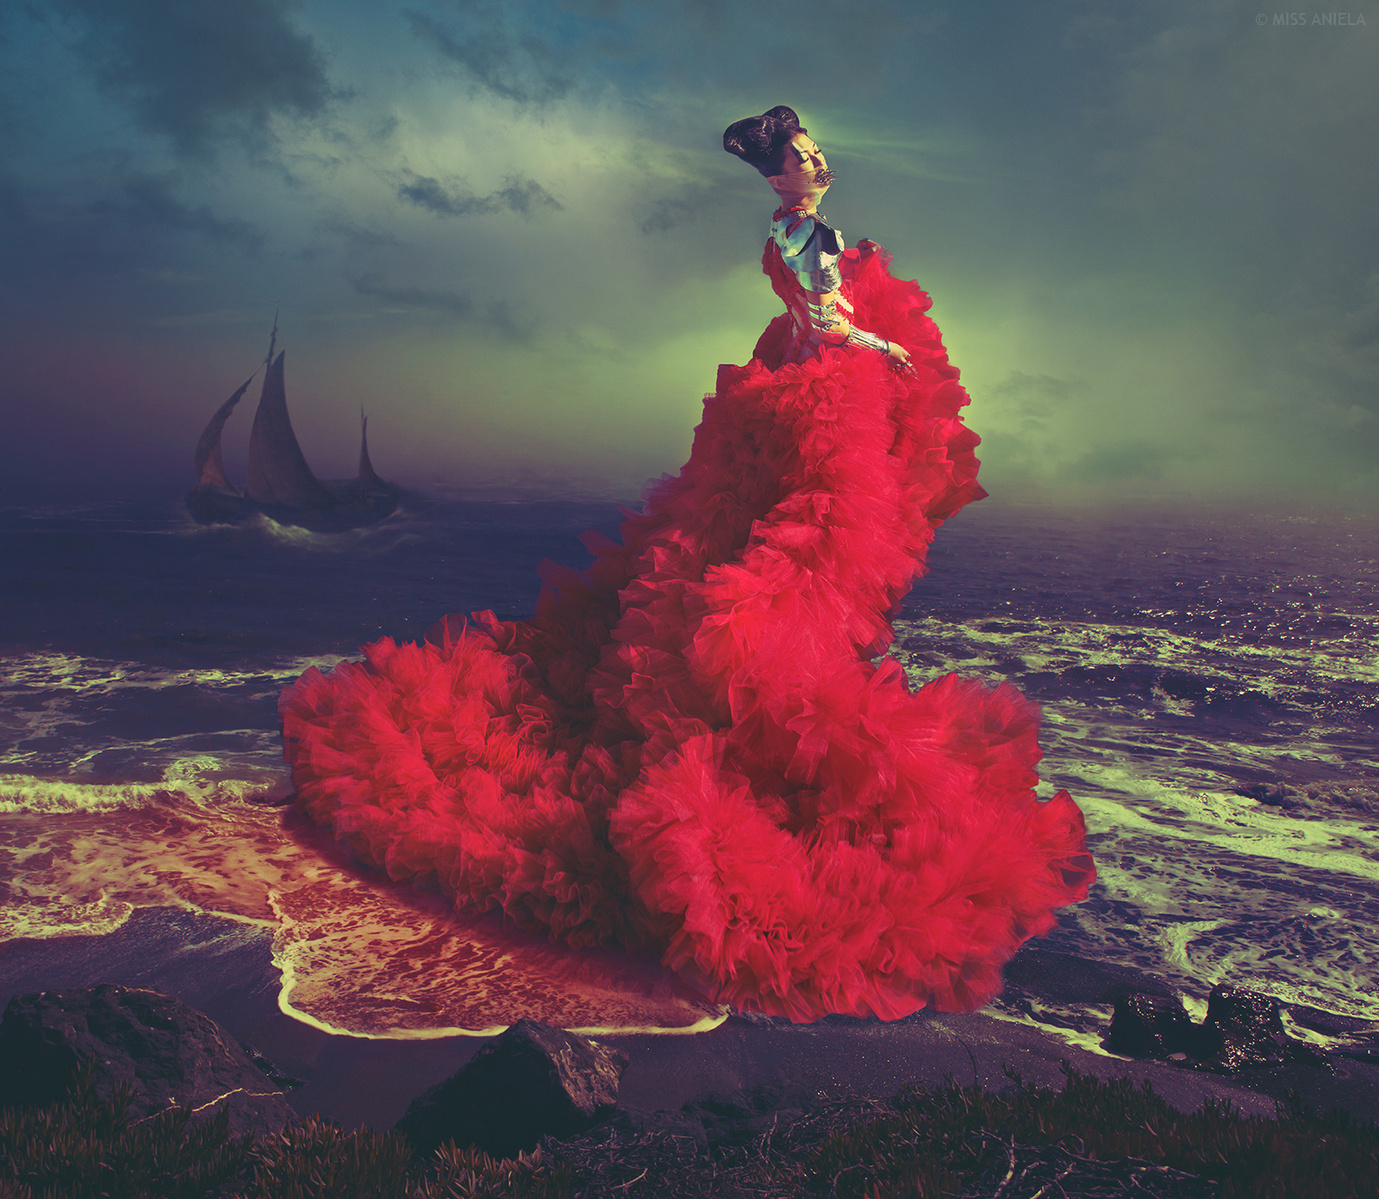 scarlet_song_miss_aniela_1600px_cred_final22